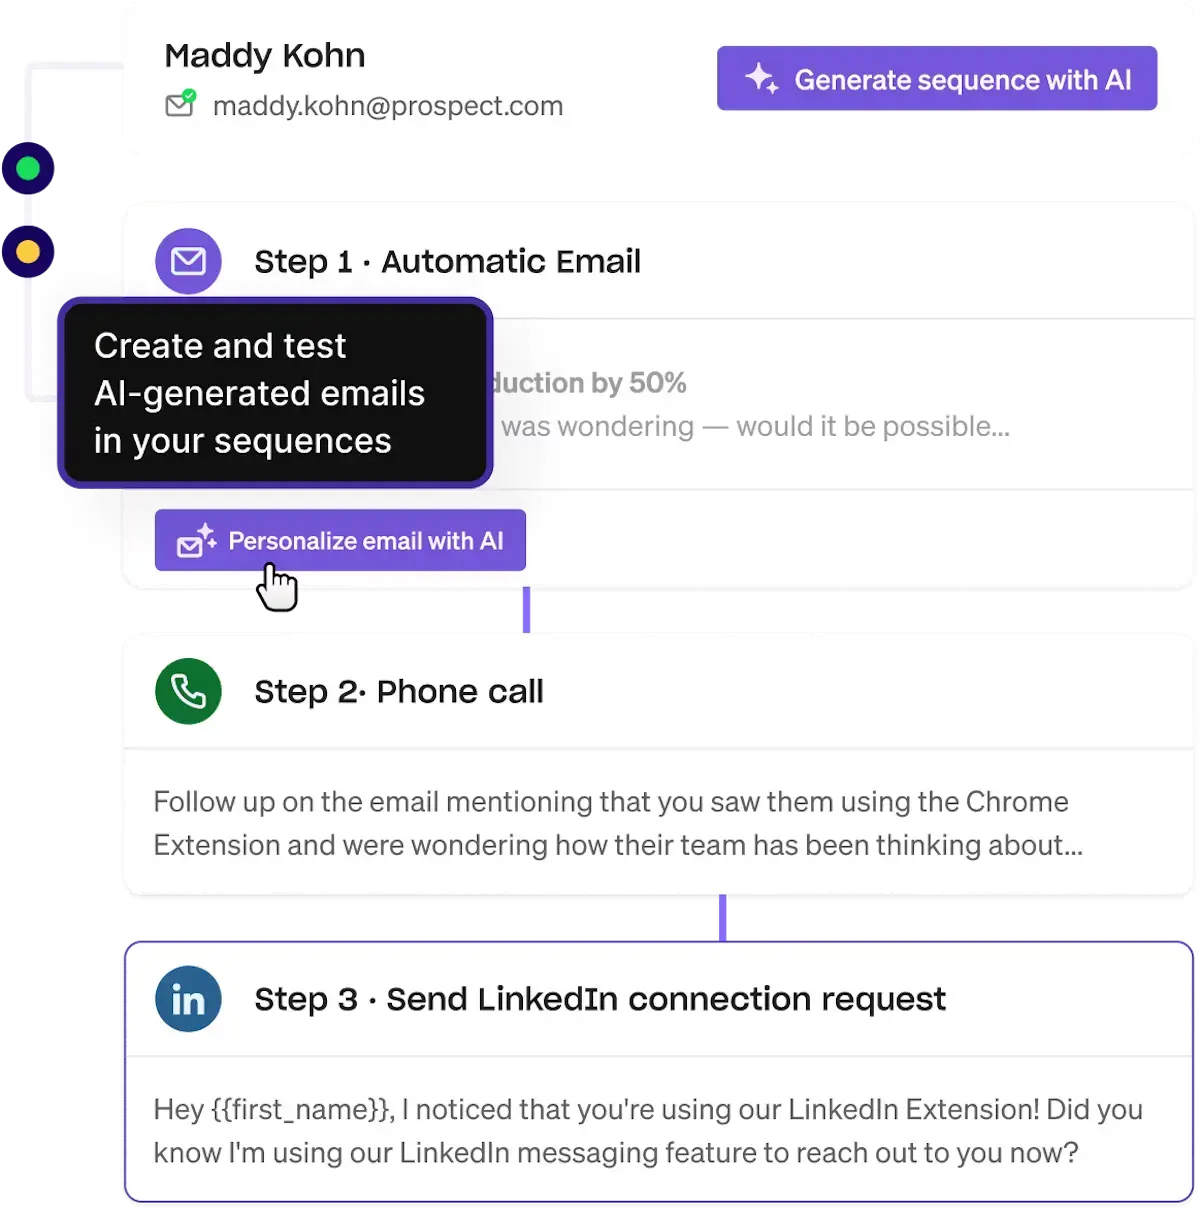 Apollo.io cold email outreach software interface showcasing lead generation with detailed contact information, email addresses, and company insights.